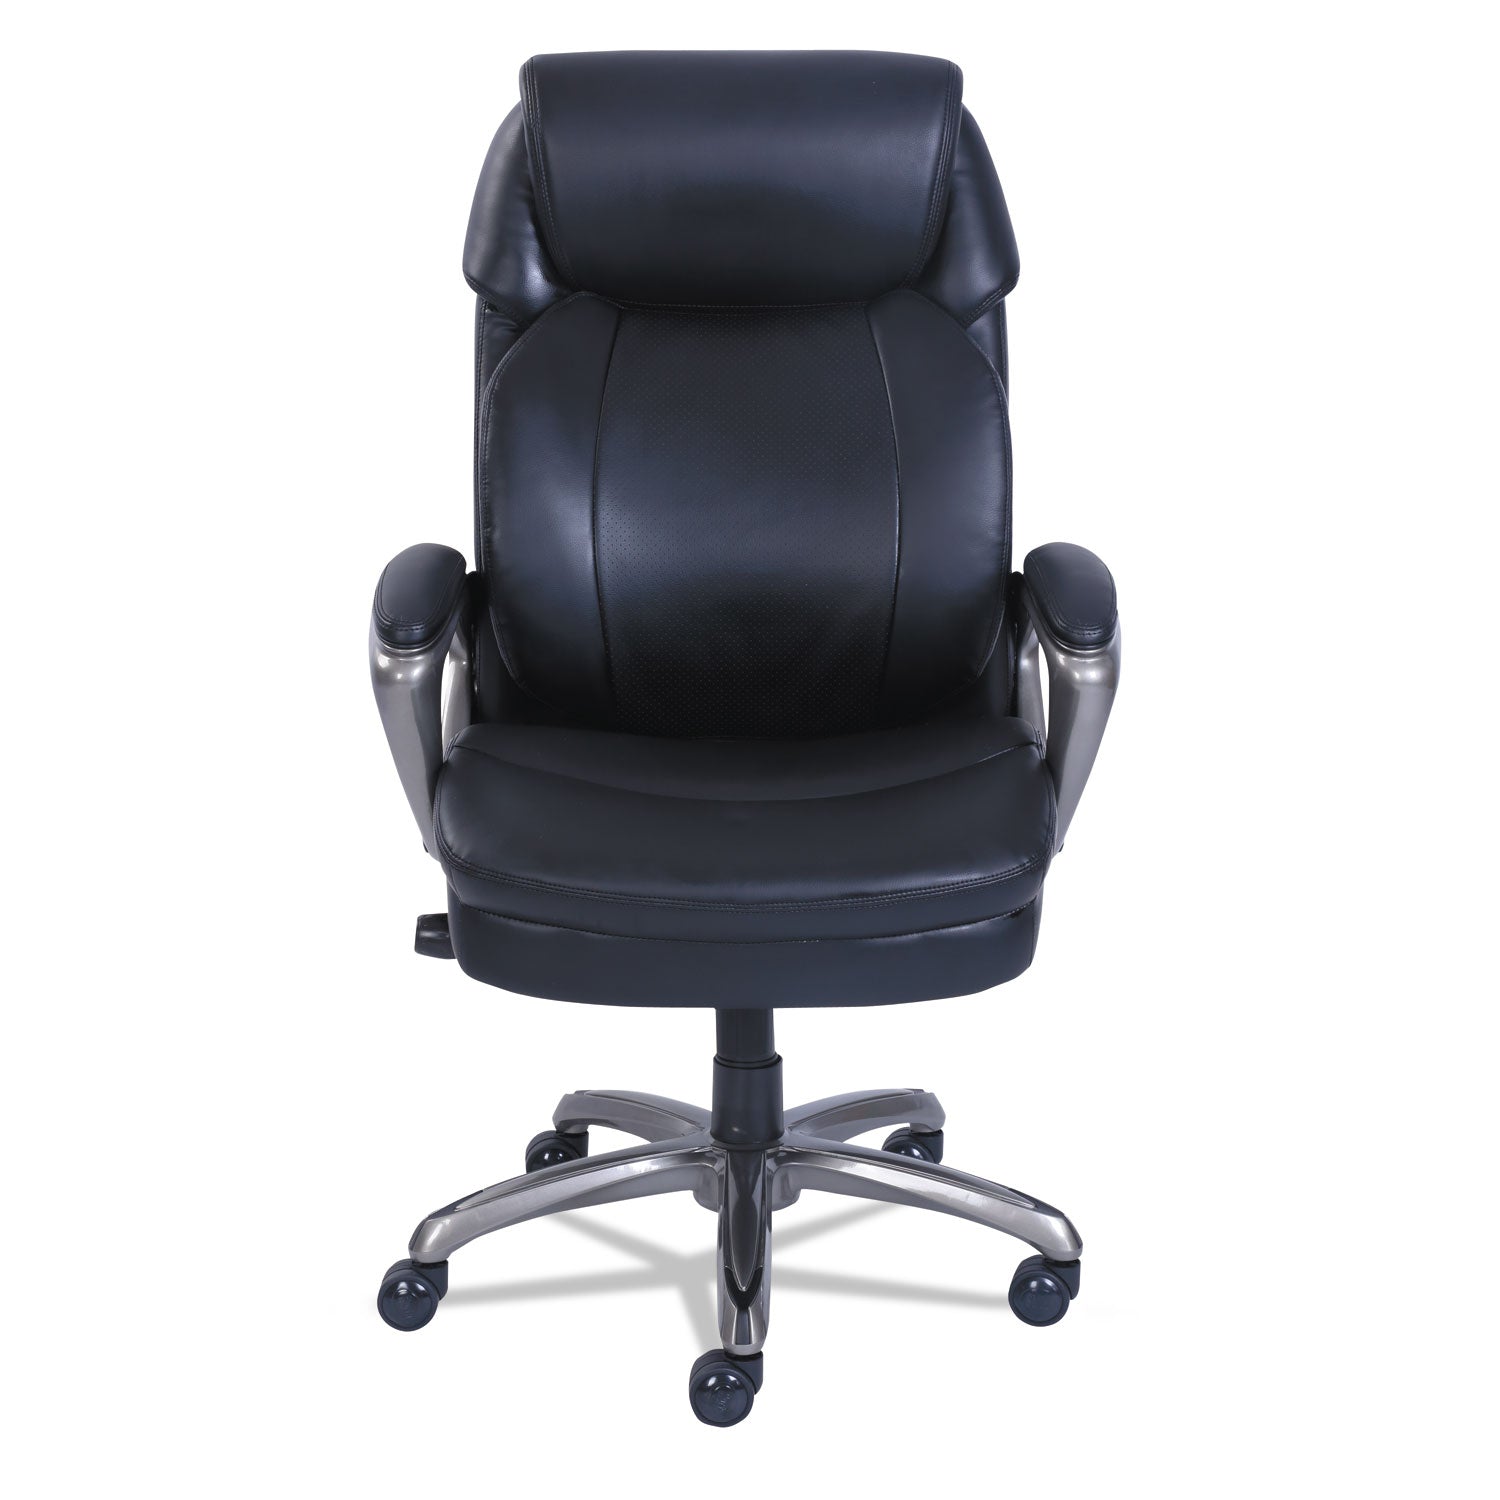 cosset-high-back-executive-chair-supports-up-to-275-lb-1875-to-2175-seat-height-black-seat-back-slate-base_srj48965 - 4